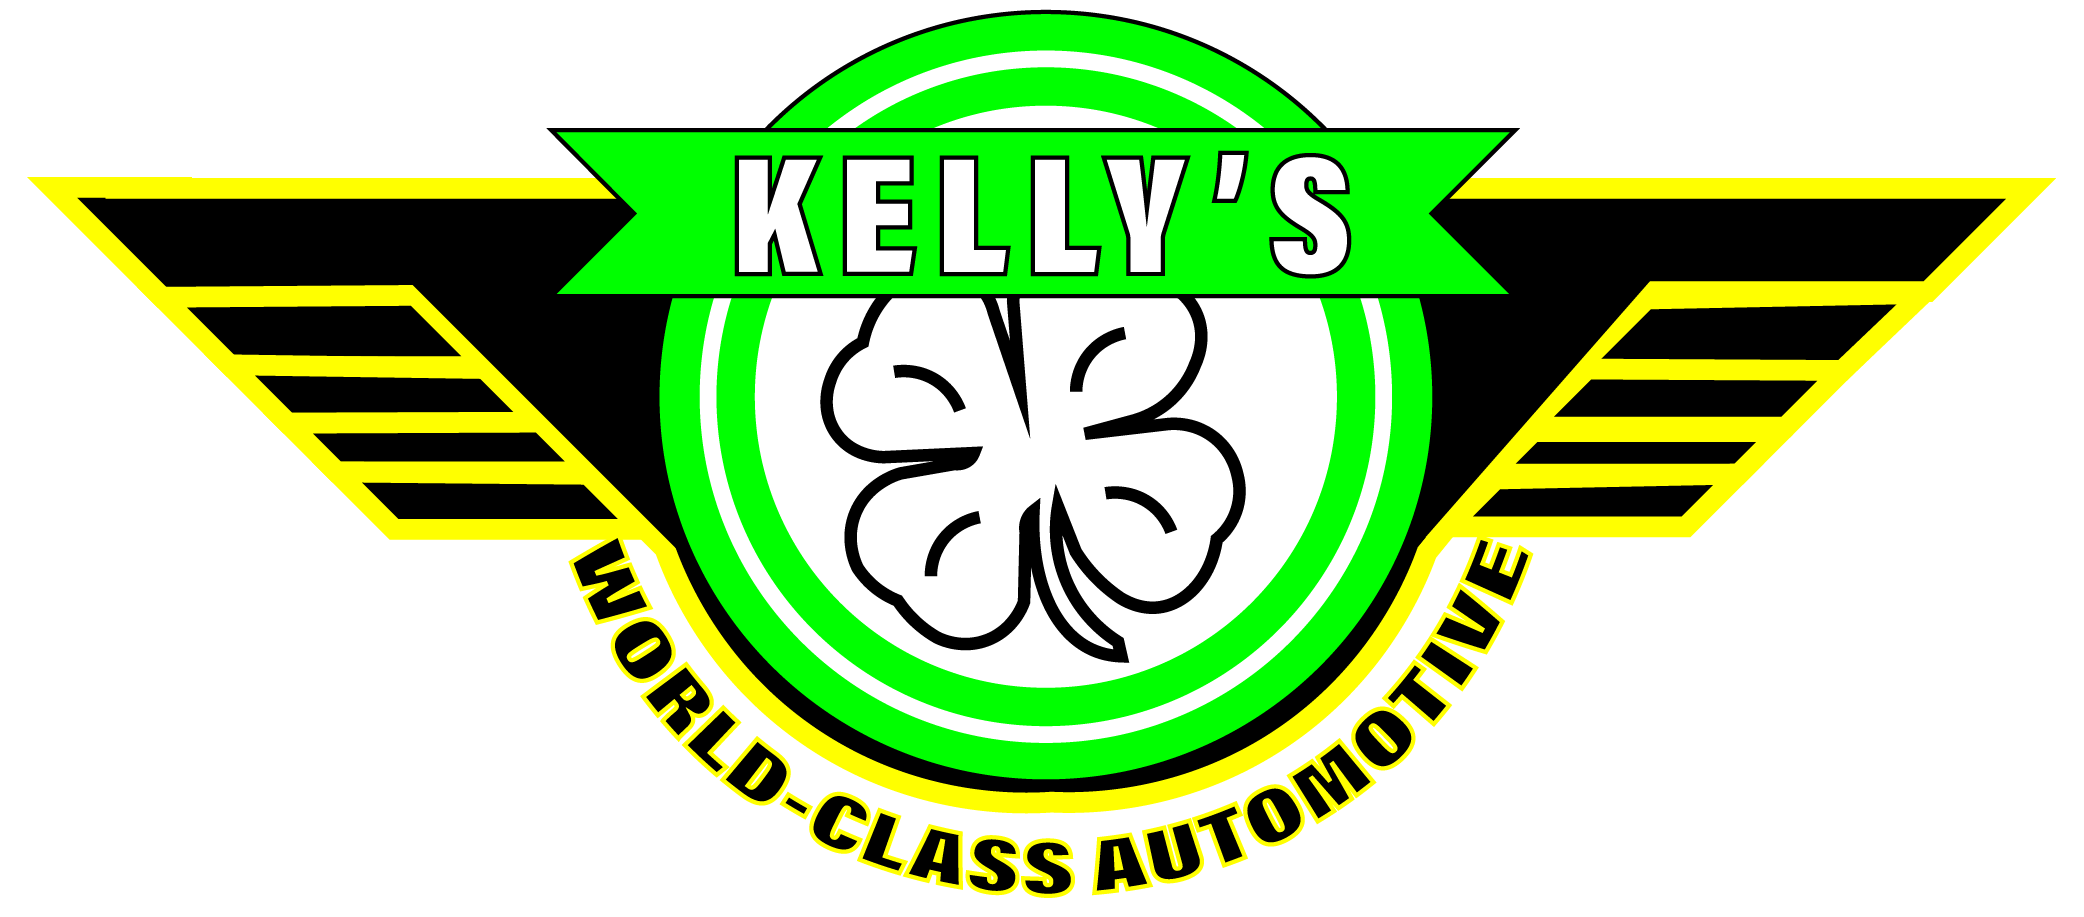 Logo Kelly’s World-Class Auto Mechanic Services in Limerick PA. Serving Limerick, Royersford, Spring City, Collegeville, Pottstown, Schwenksville, and more.